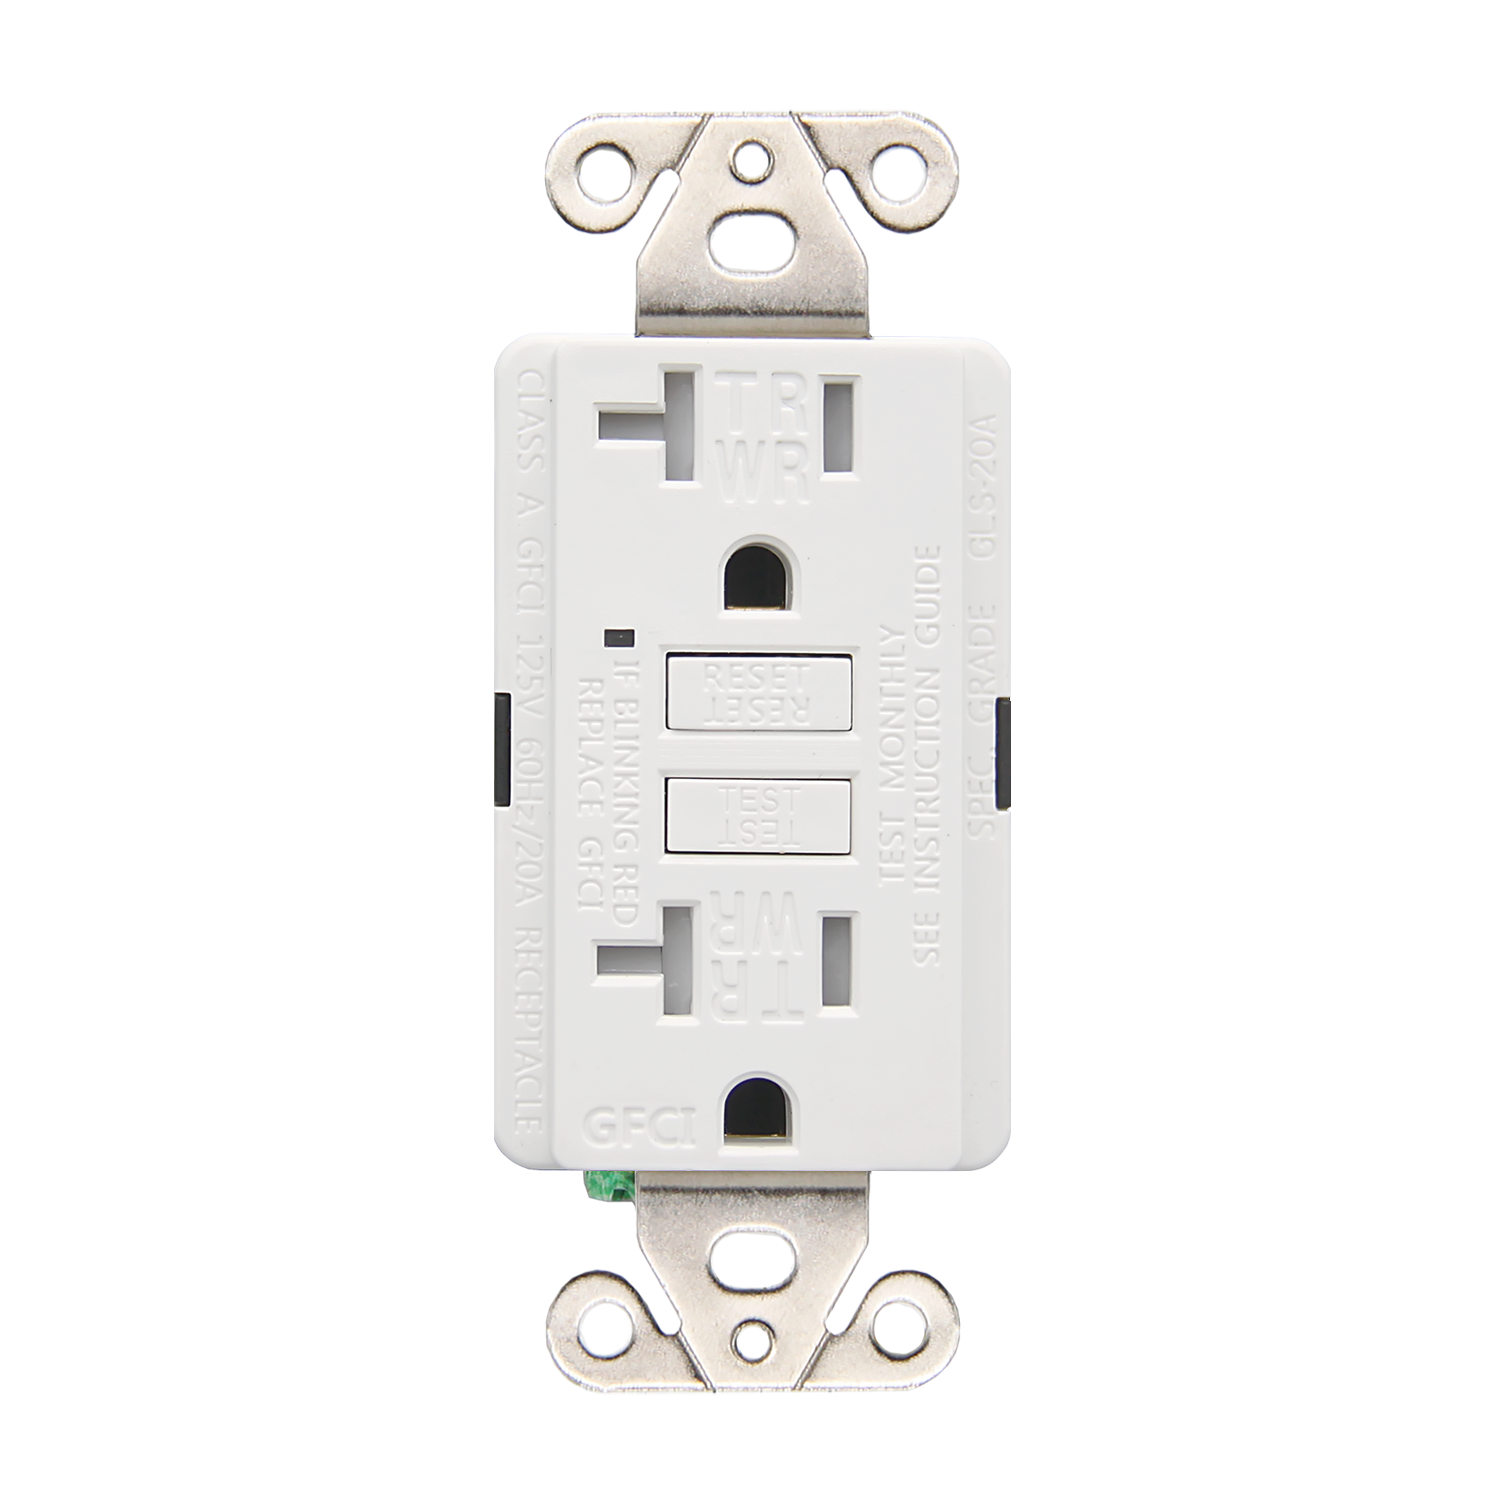 UL Listed 20 Amp Self-Test Tamper And Weather-Resistant Duplex Outdoor GFCI Outlet With Wall Plate, GLS-20ATRWR